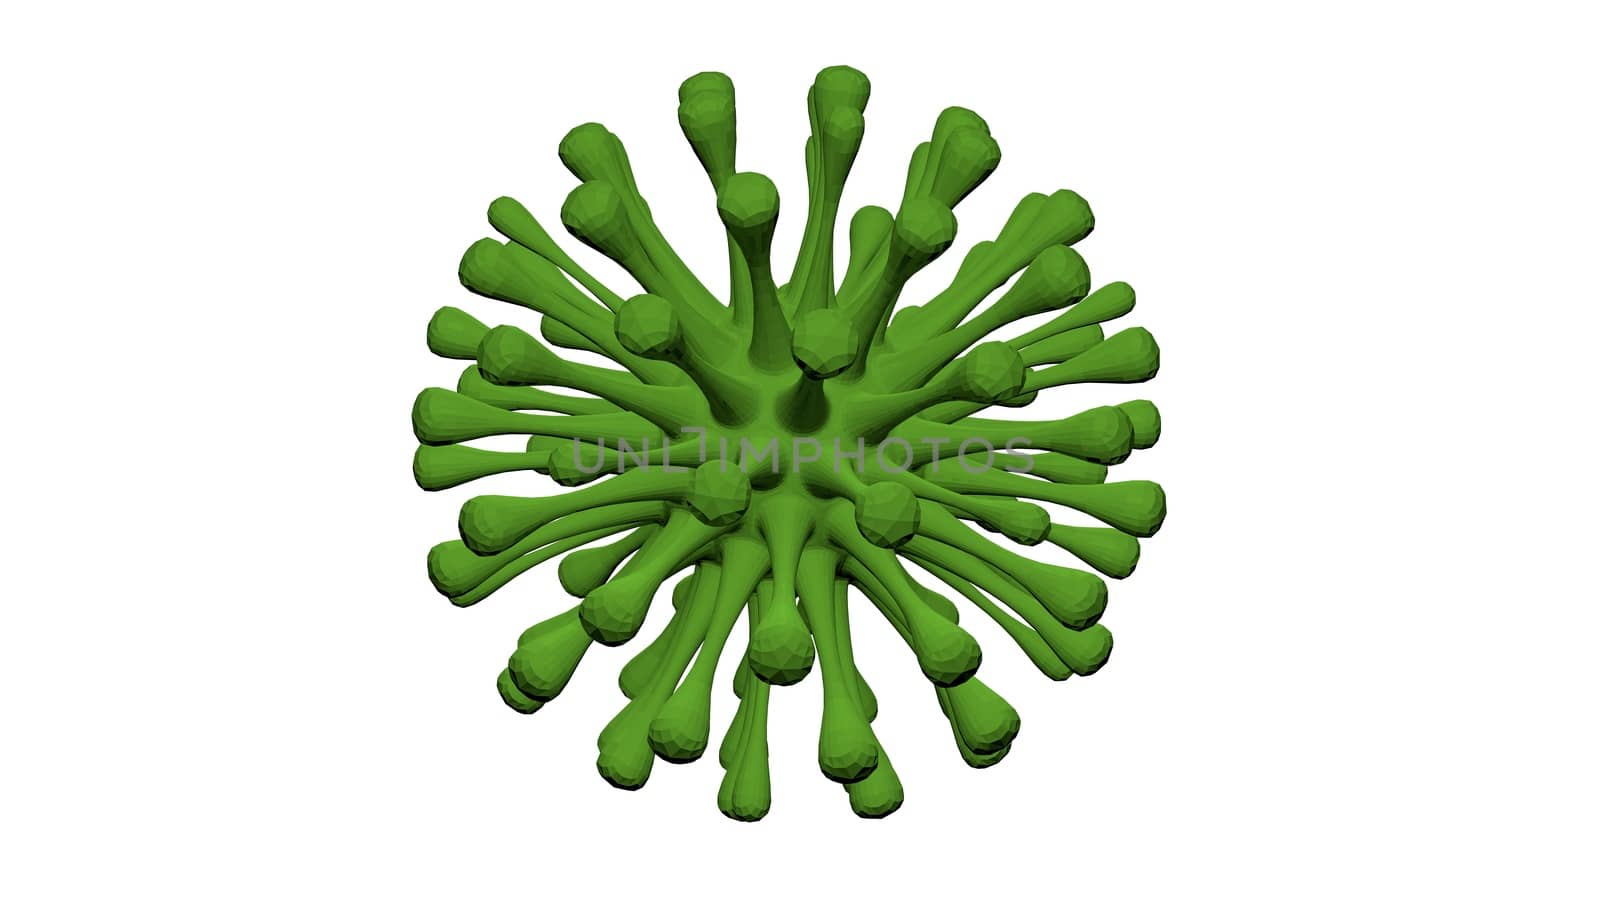 Closeup of a virus structure against clear background by Photochowk